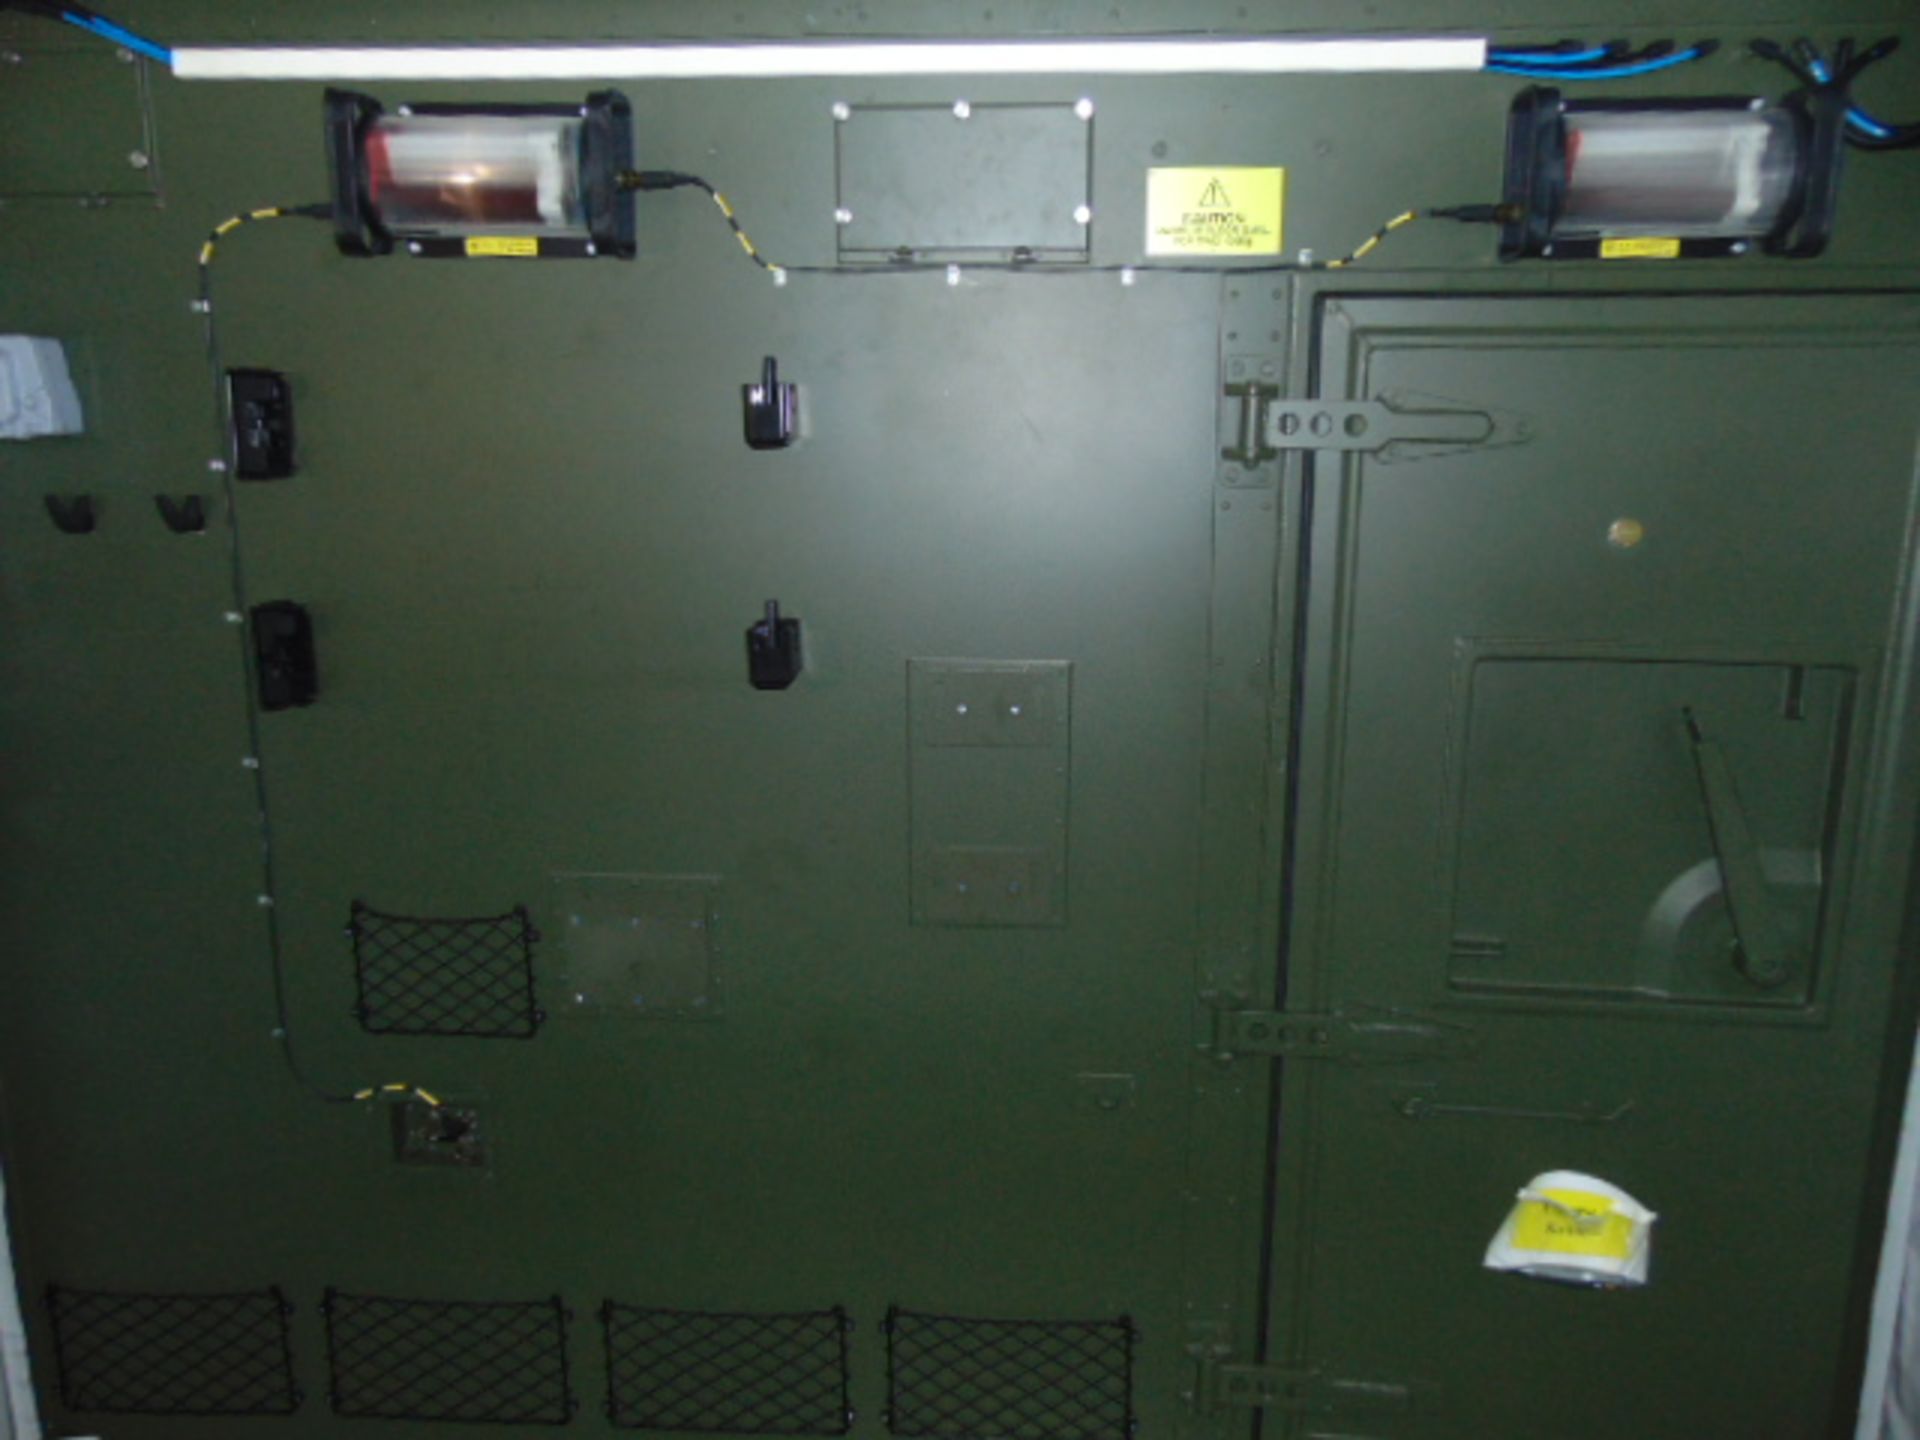 Containerised Insys Ltd Integrated Biological Detection/Decontamination System (IBDS) - Image 53 of 66